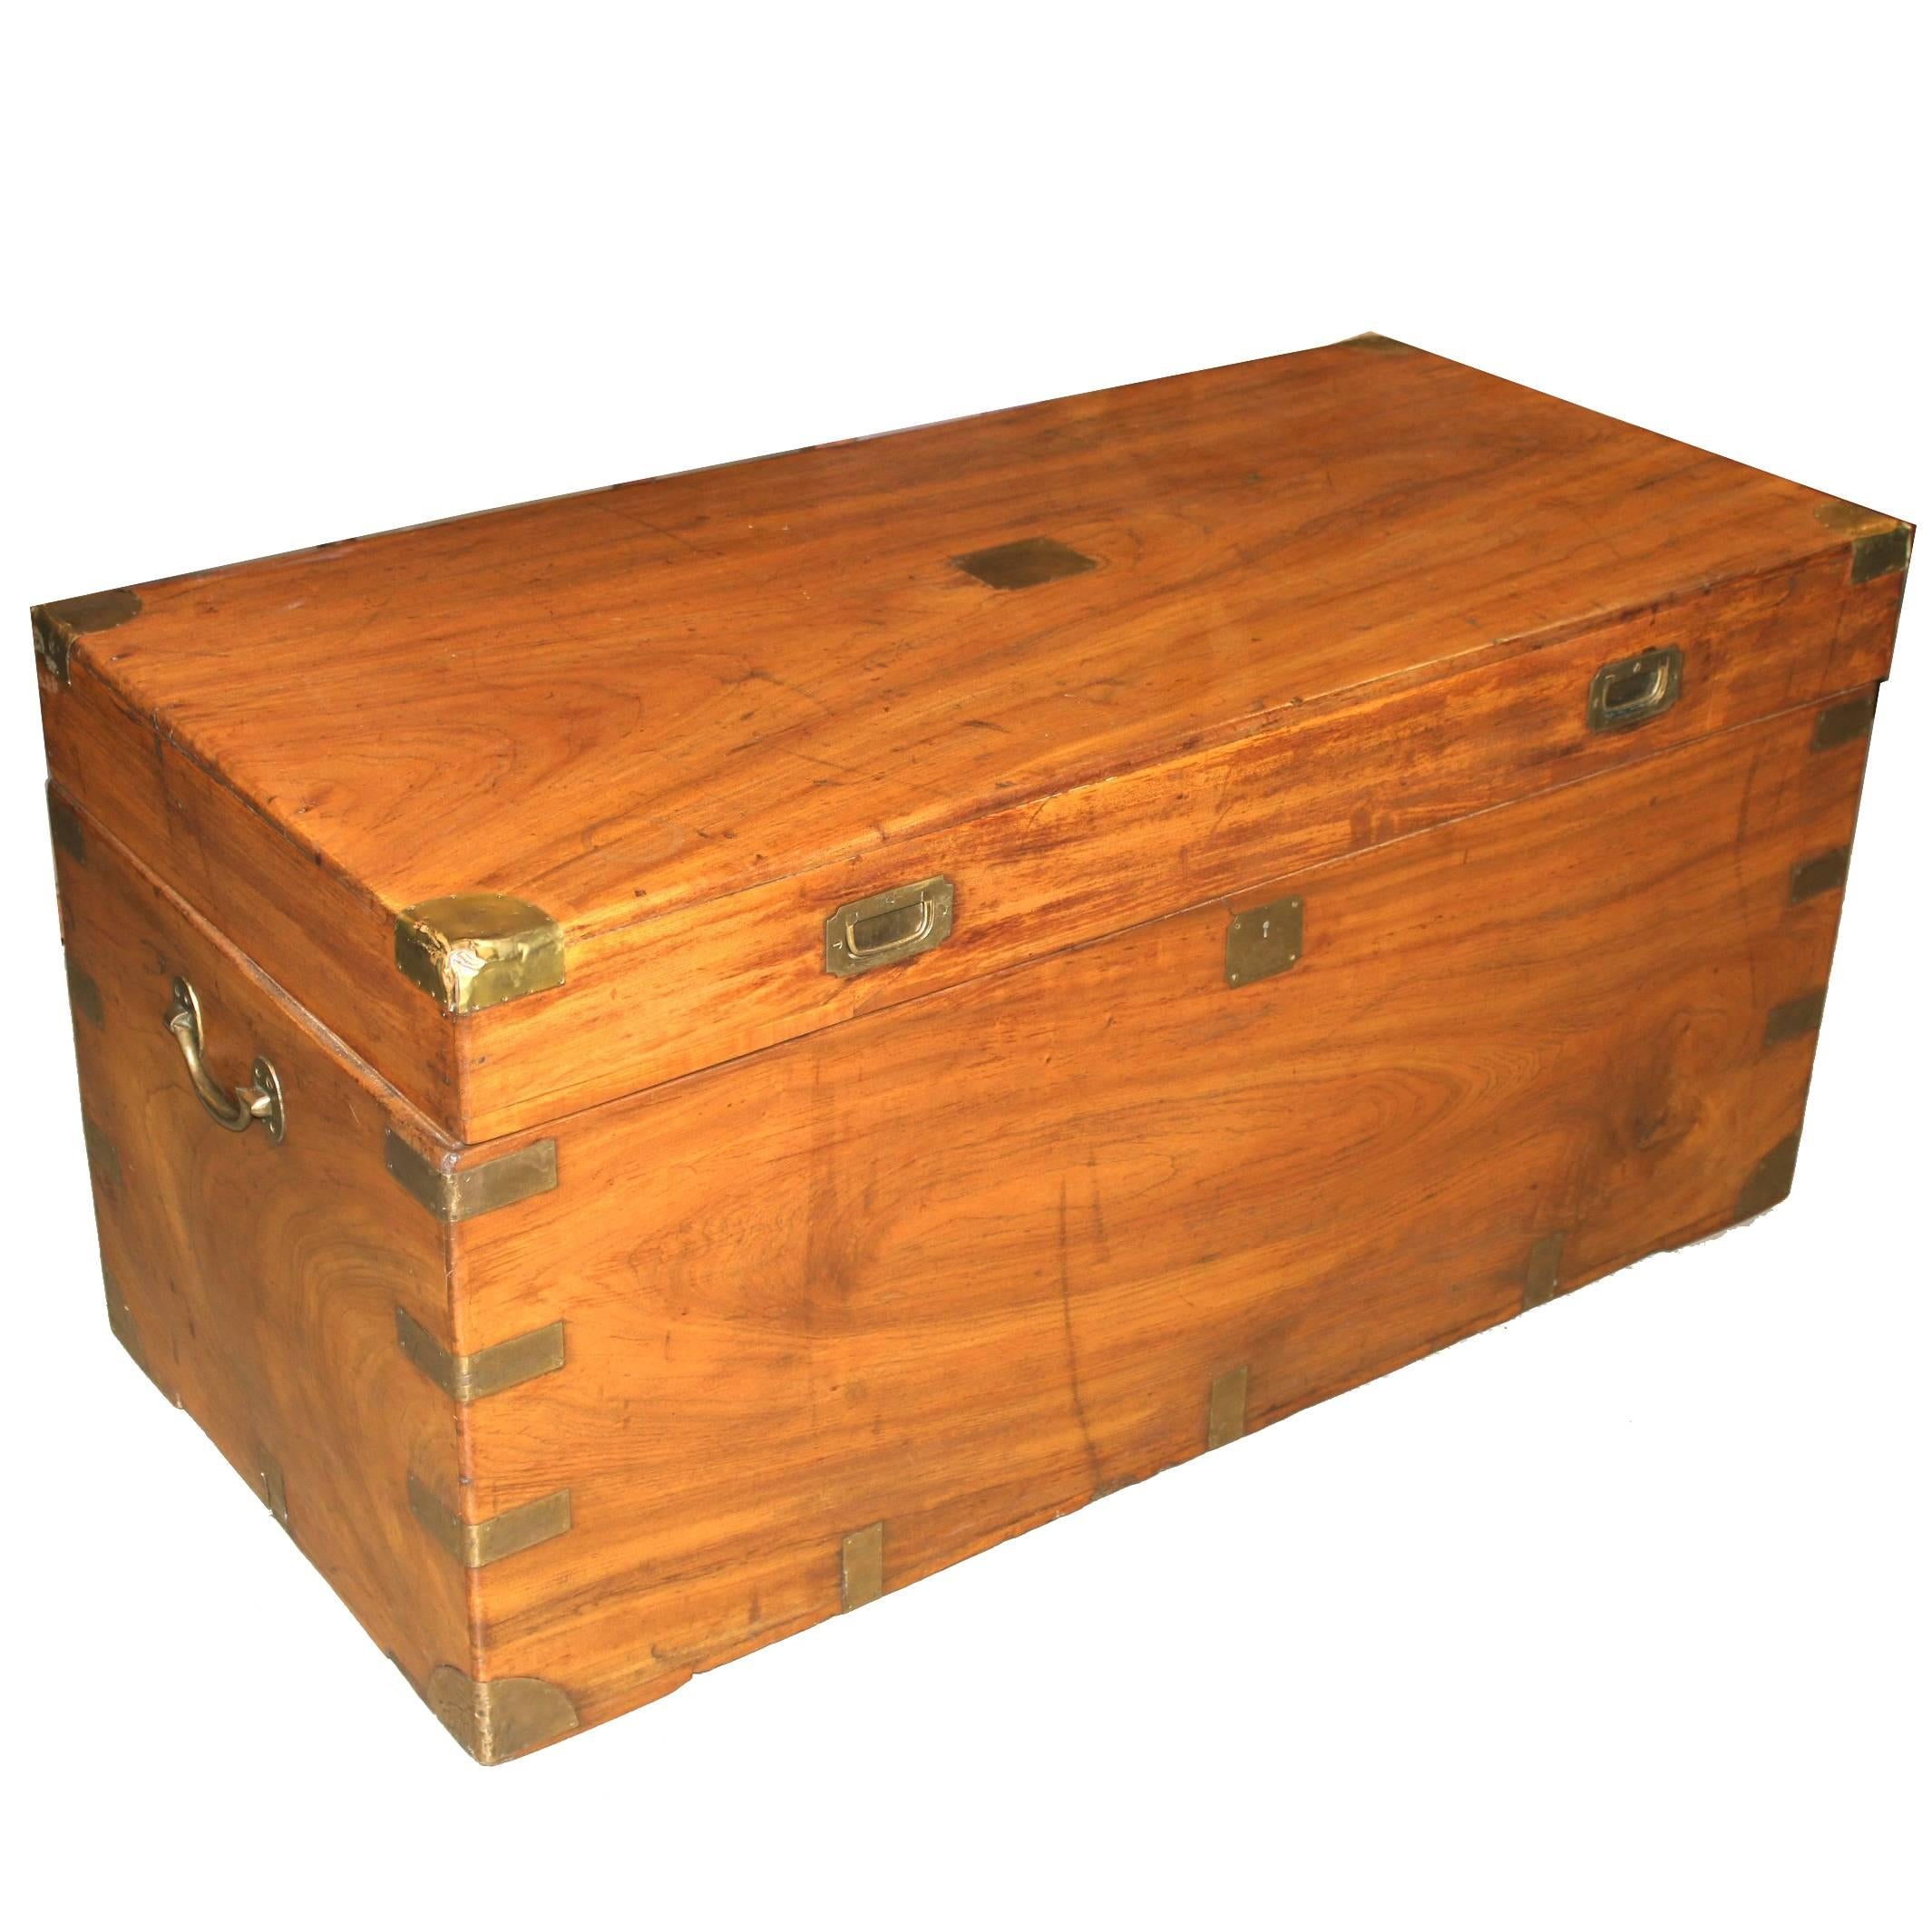 China Trade Camphor Wood Trunk or Campaign Chest, circa 1800